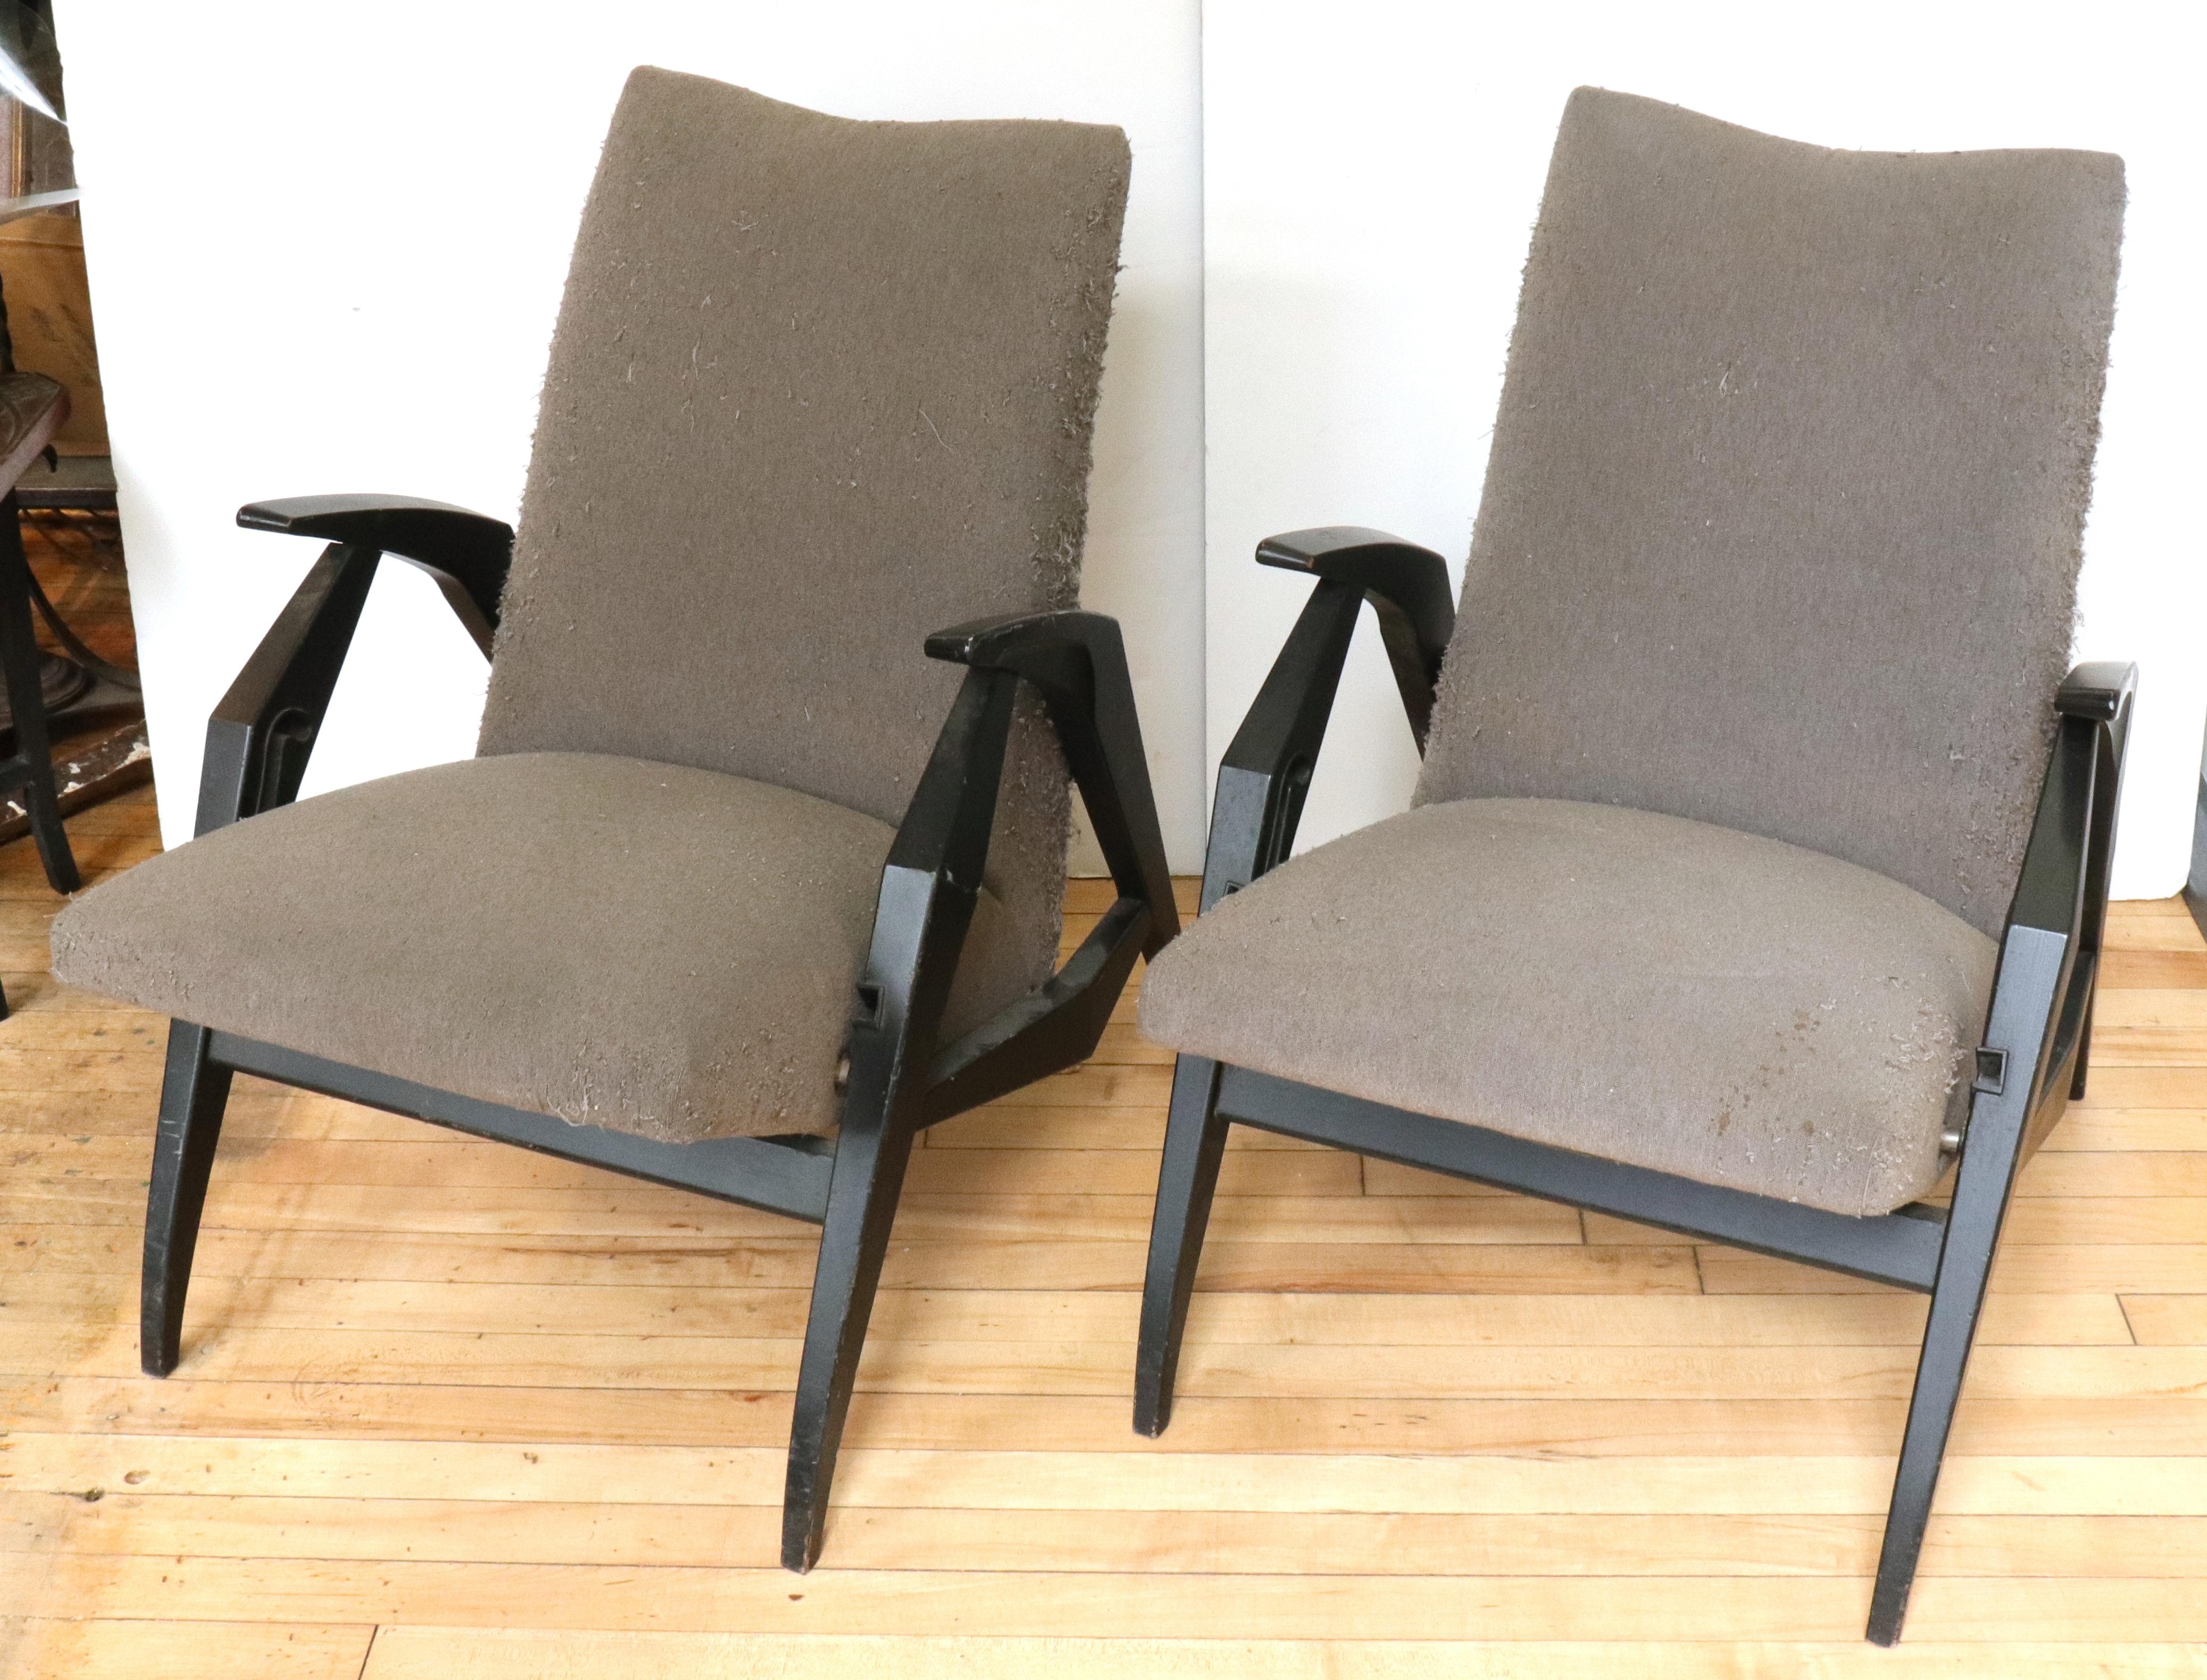 Italian Mid-Century Modern pair of diminutive reclining adjustable armchairs with a lacquered wood structure and in original upholstery. The pair switches from upright into a reclining position and was made in Italy during the 1950s. In great